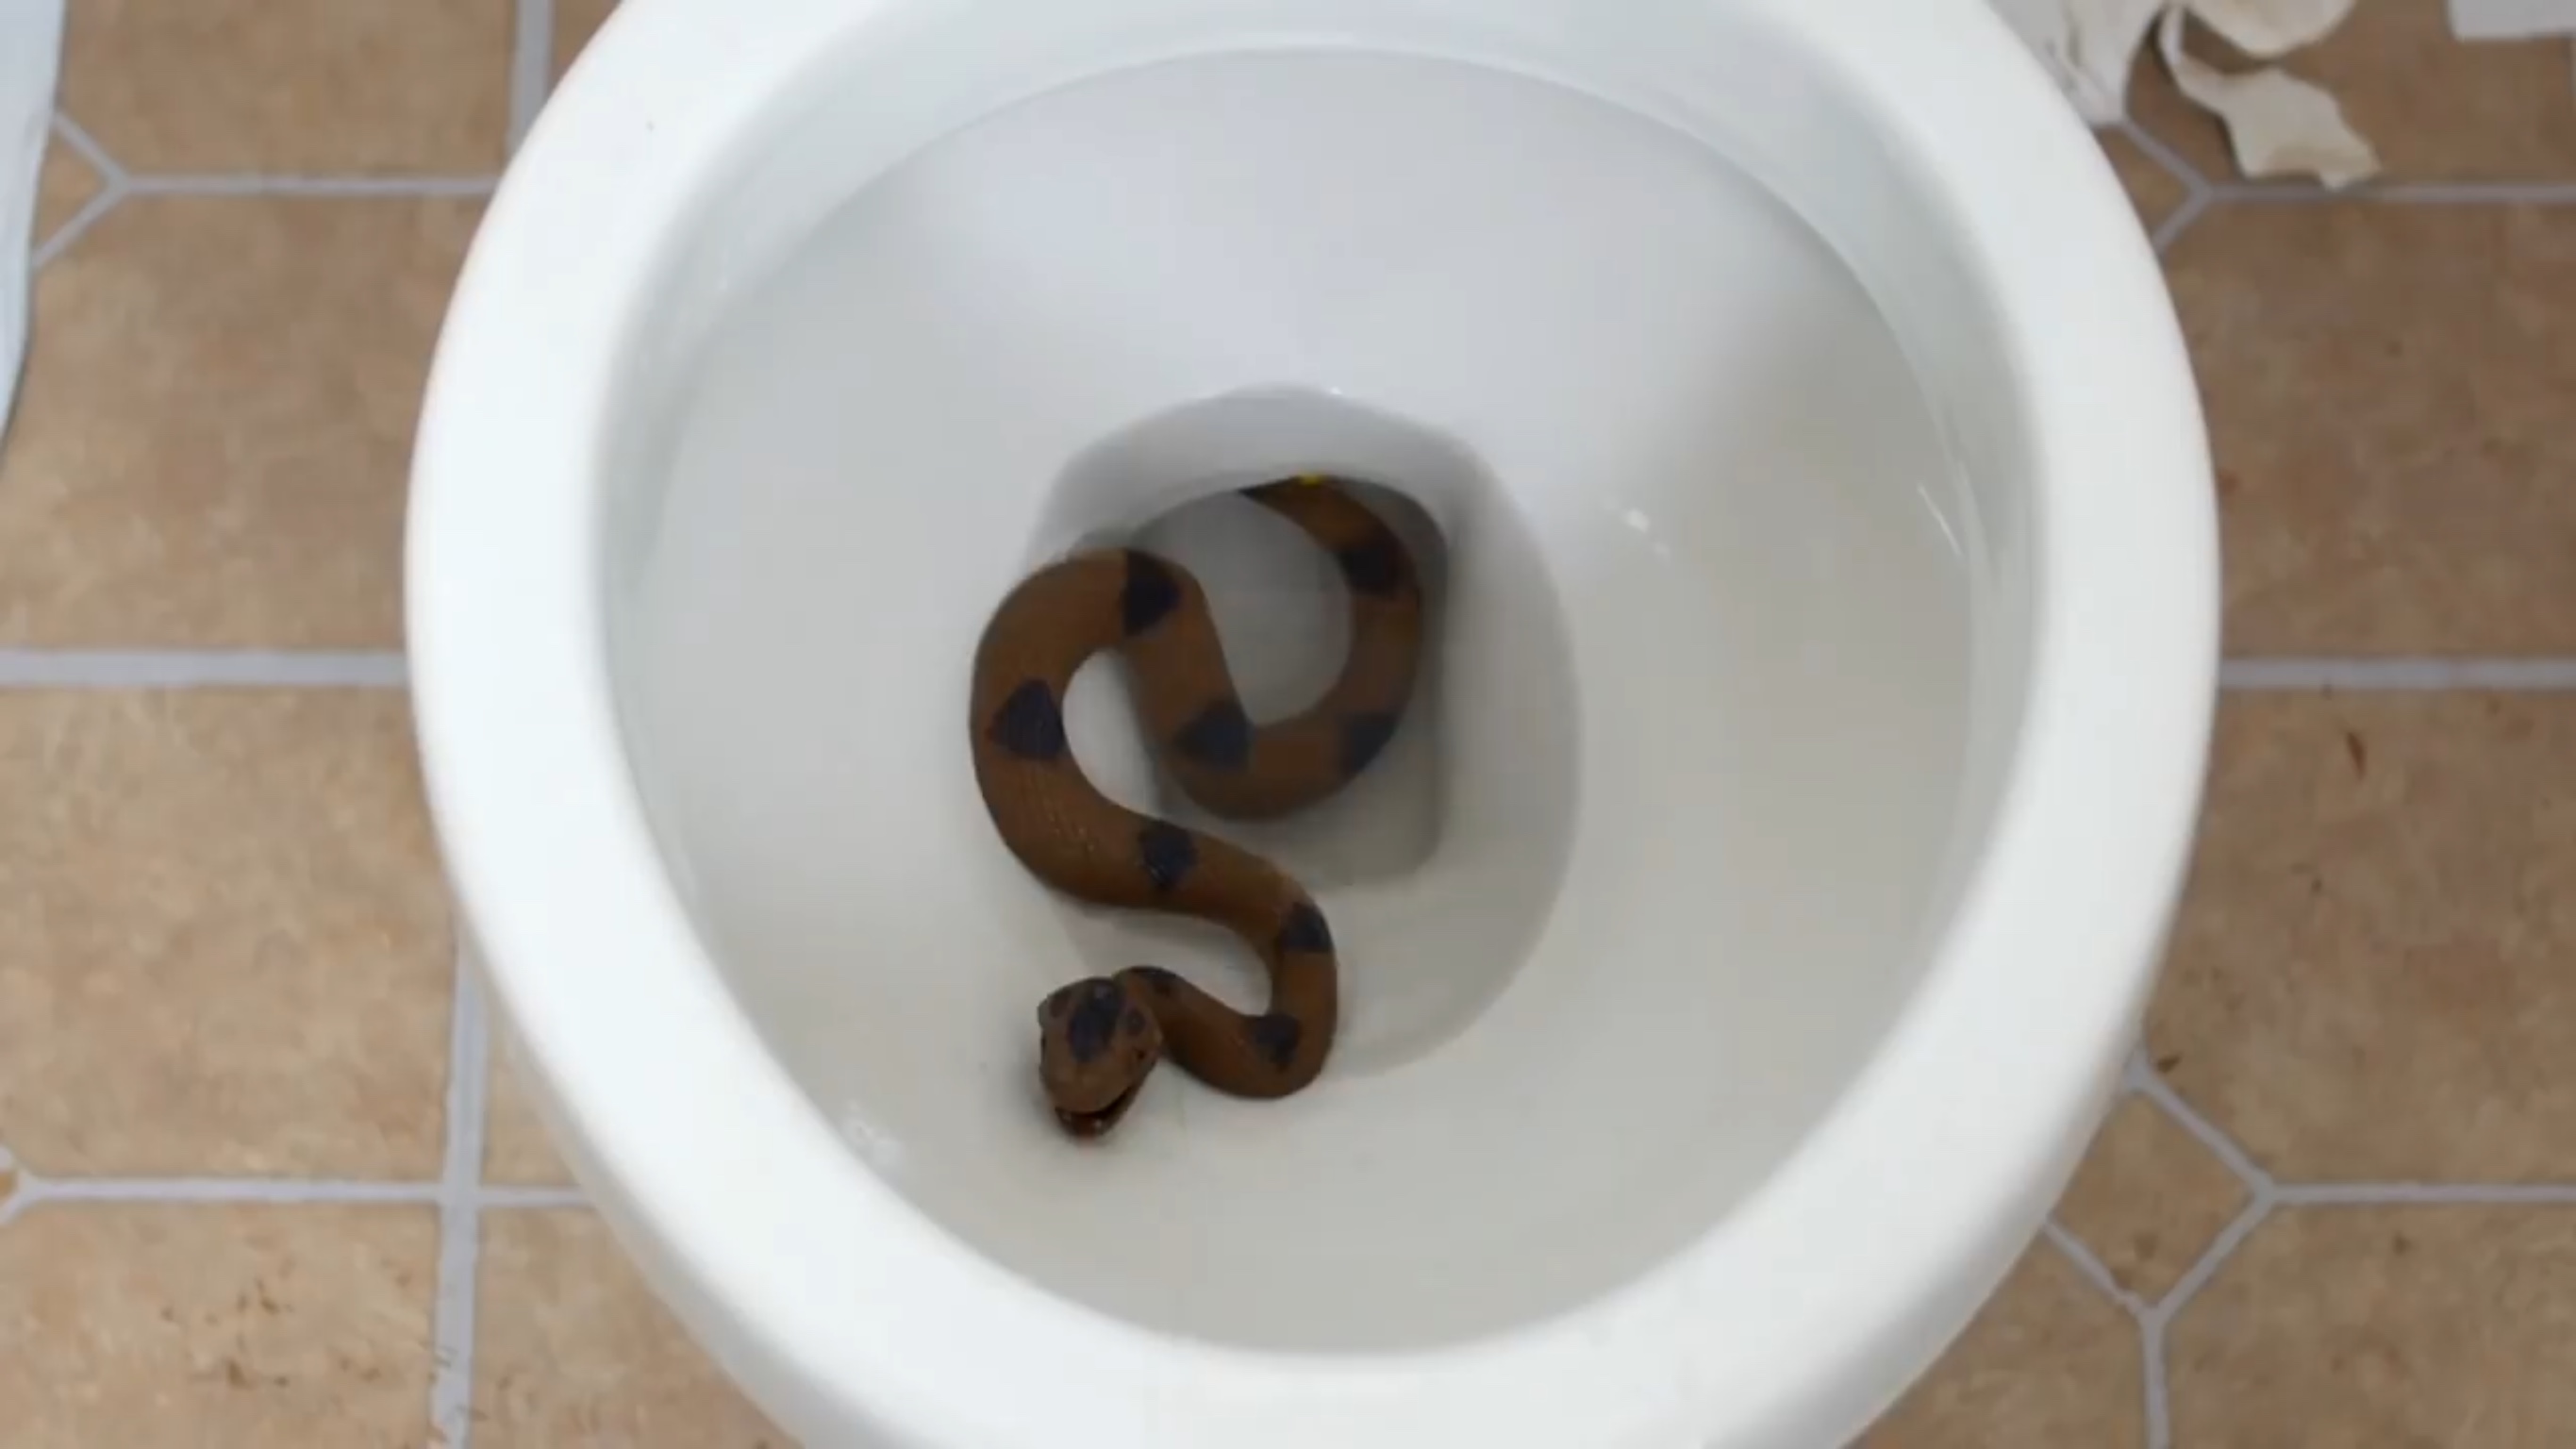 https://static.wikia.nocookie.net/jesseandmike/images/e/e0/Snake_in_a_toilet.jpg/revision/latest?cb=20200703123710